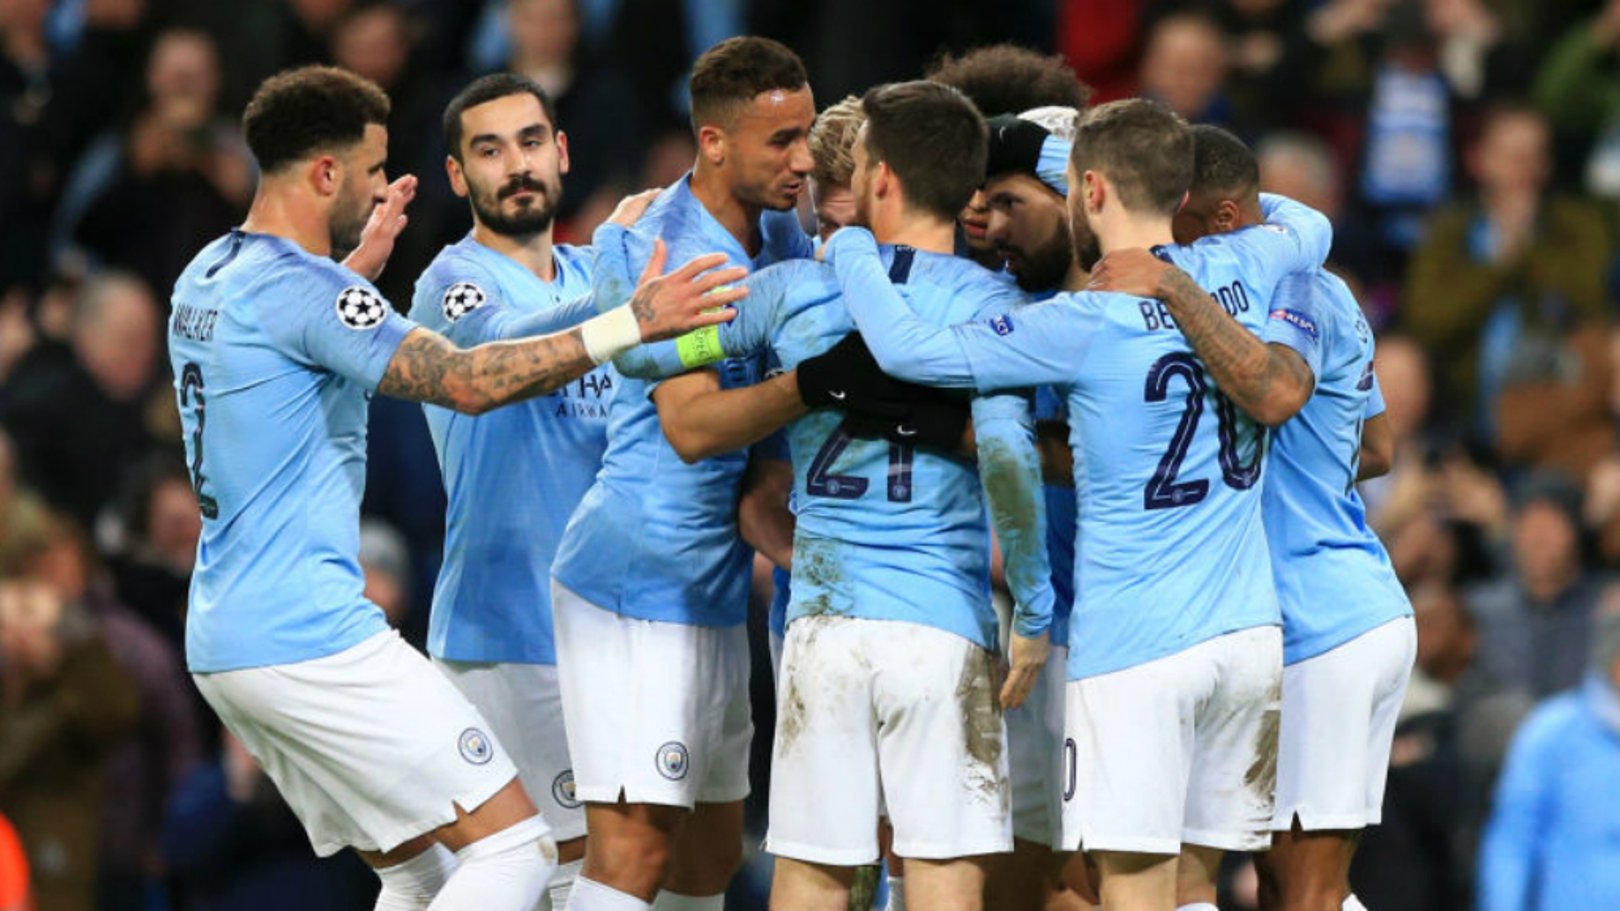 Manchester City equal Champions League record